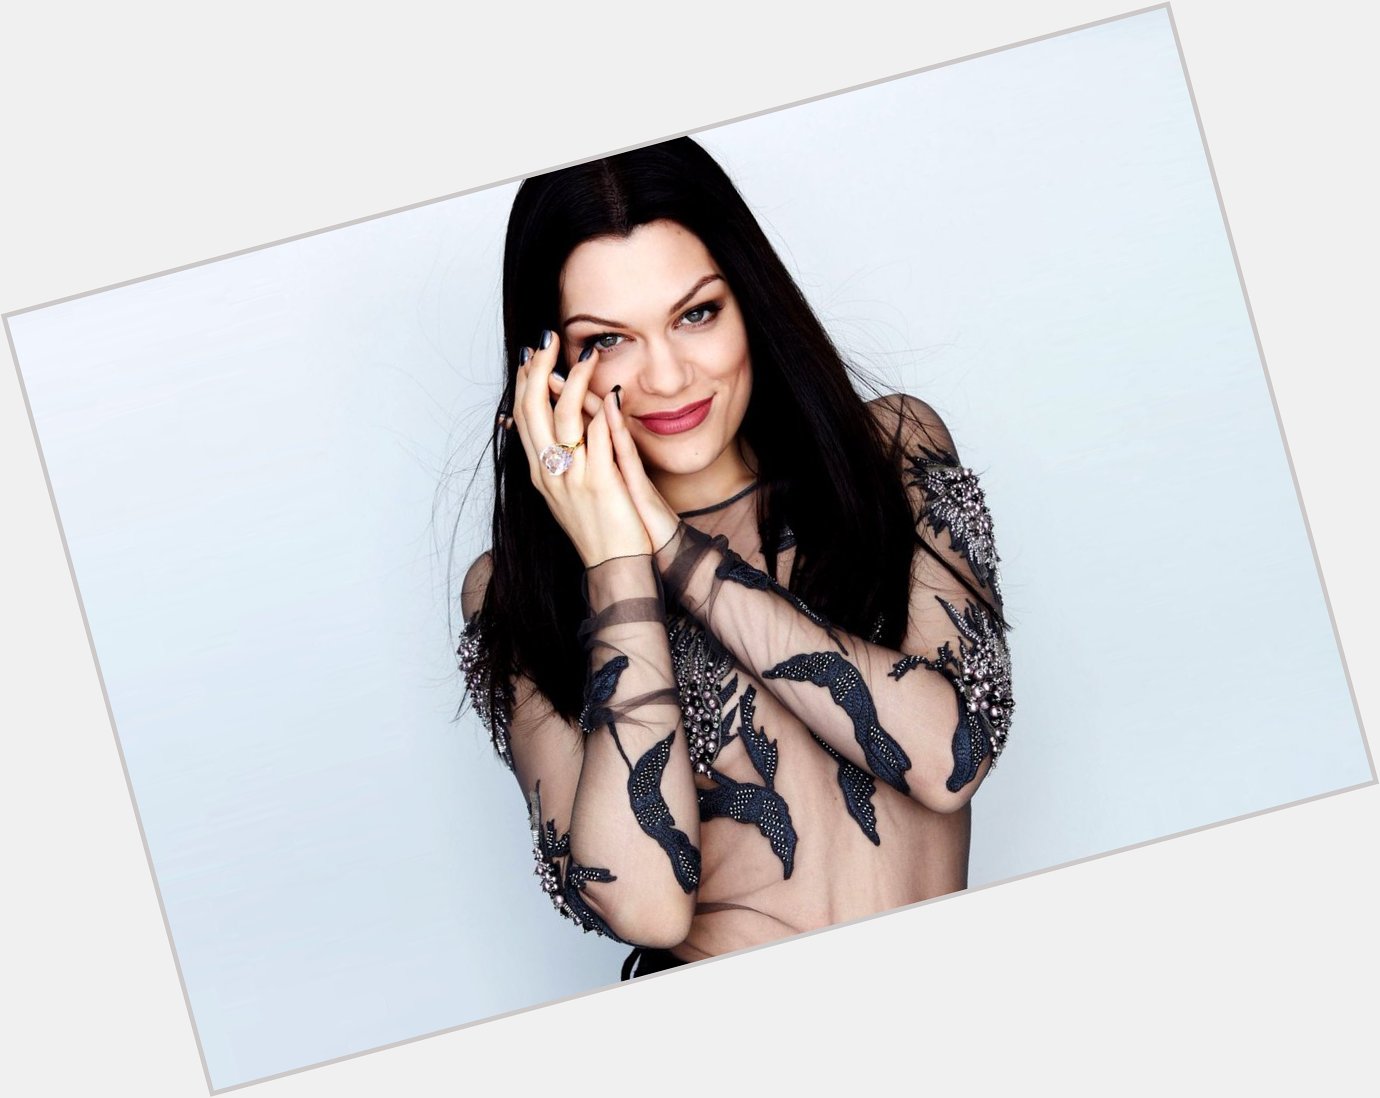 Happy birthday to the beautiful and talented Jessie J. The Grammy nominated UK songstress turns 29 today! 